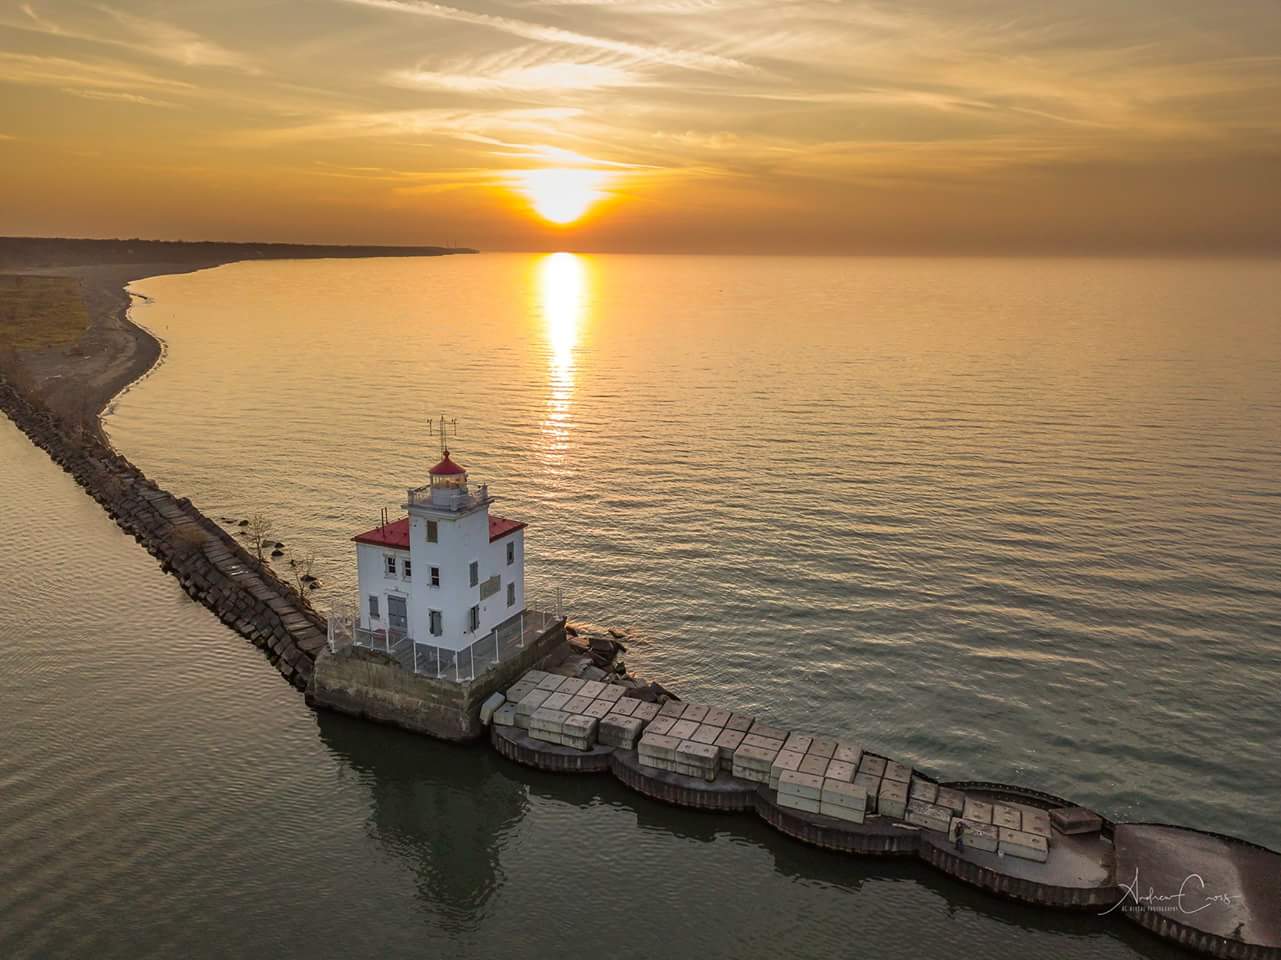 A white lighthouse with a red roof on the water at sunset